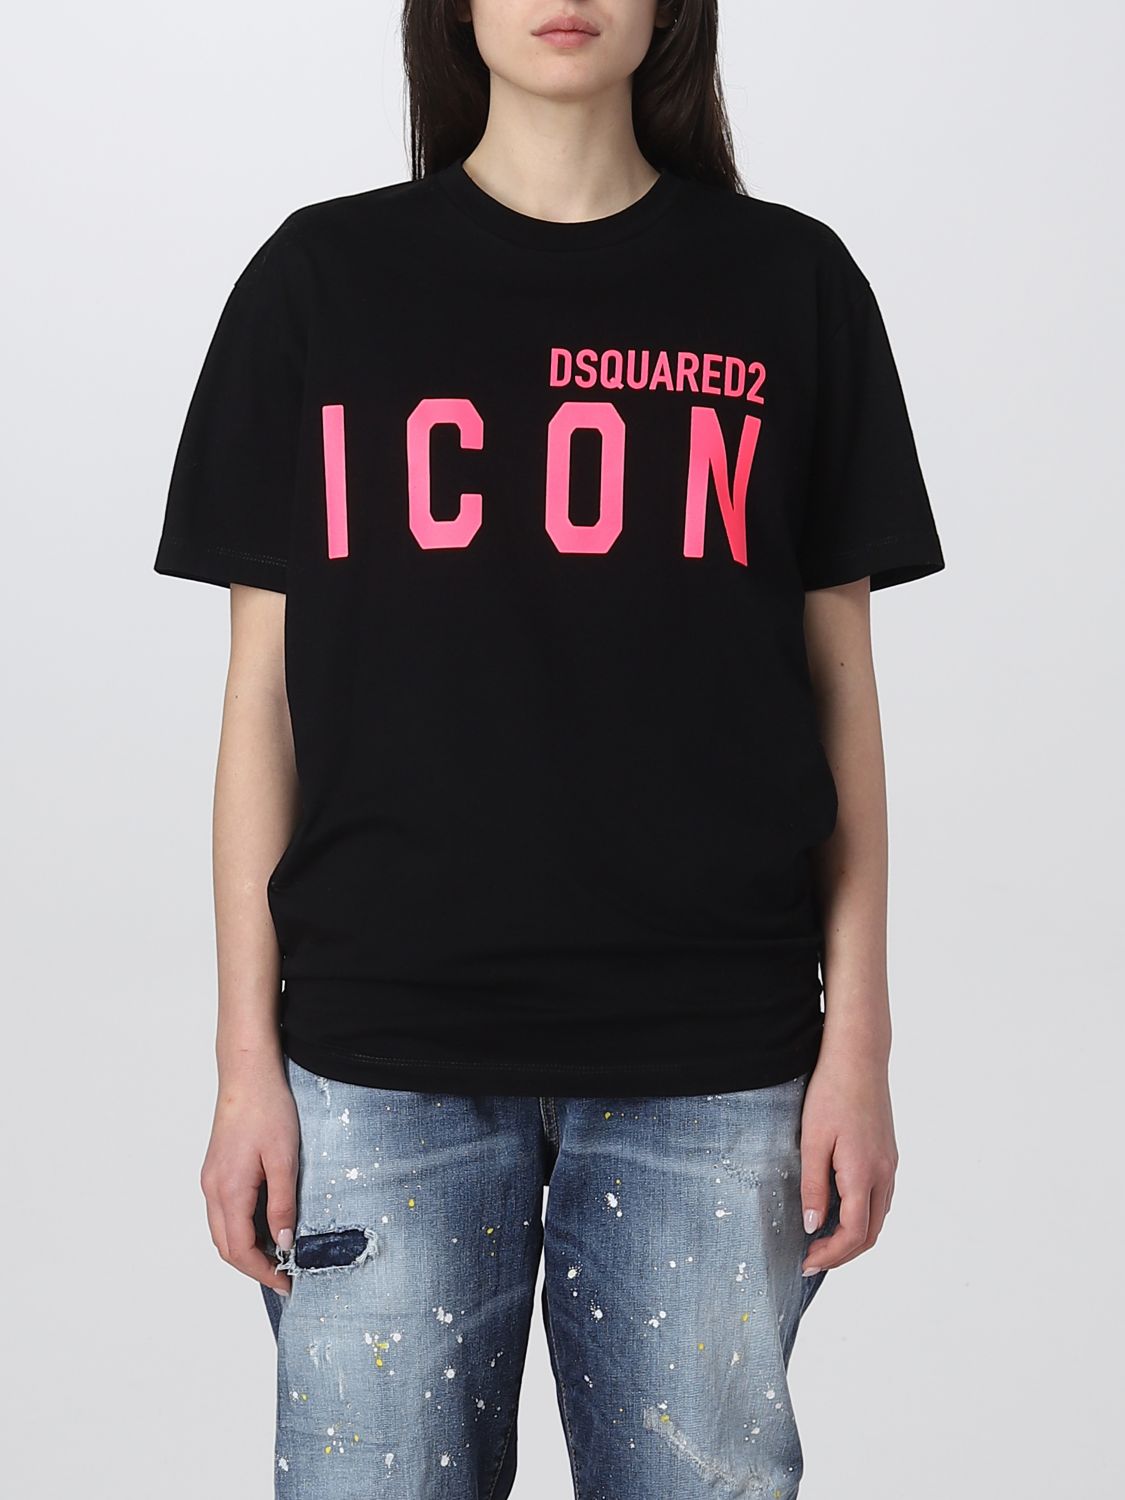 Inspectie browser verontreiniging DSQUARED2: t-shirt for man - Black | Dsquared2 t-shirt S79GC0068S23009  online on GIGLIO.COM